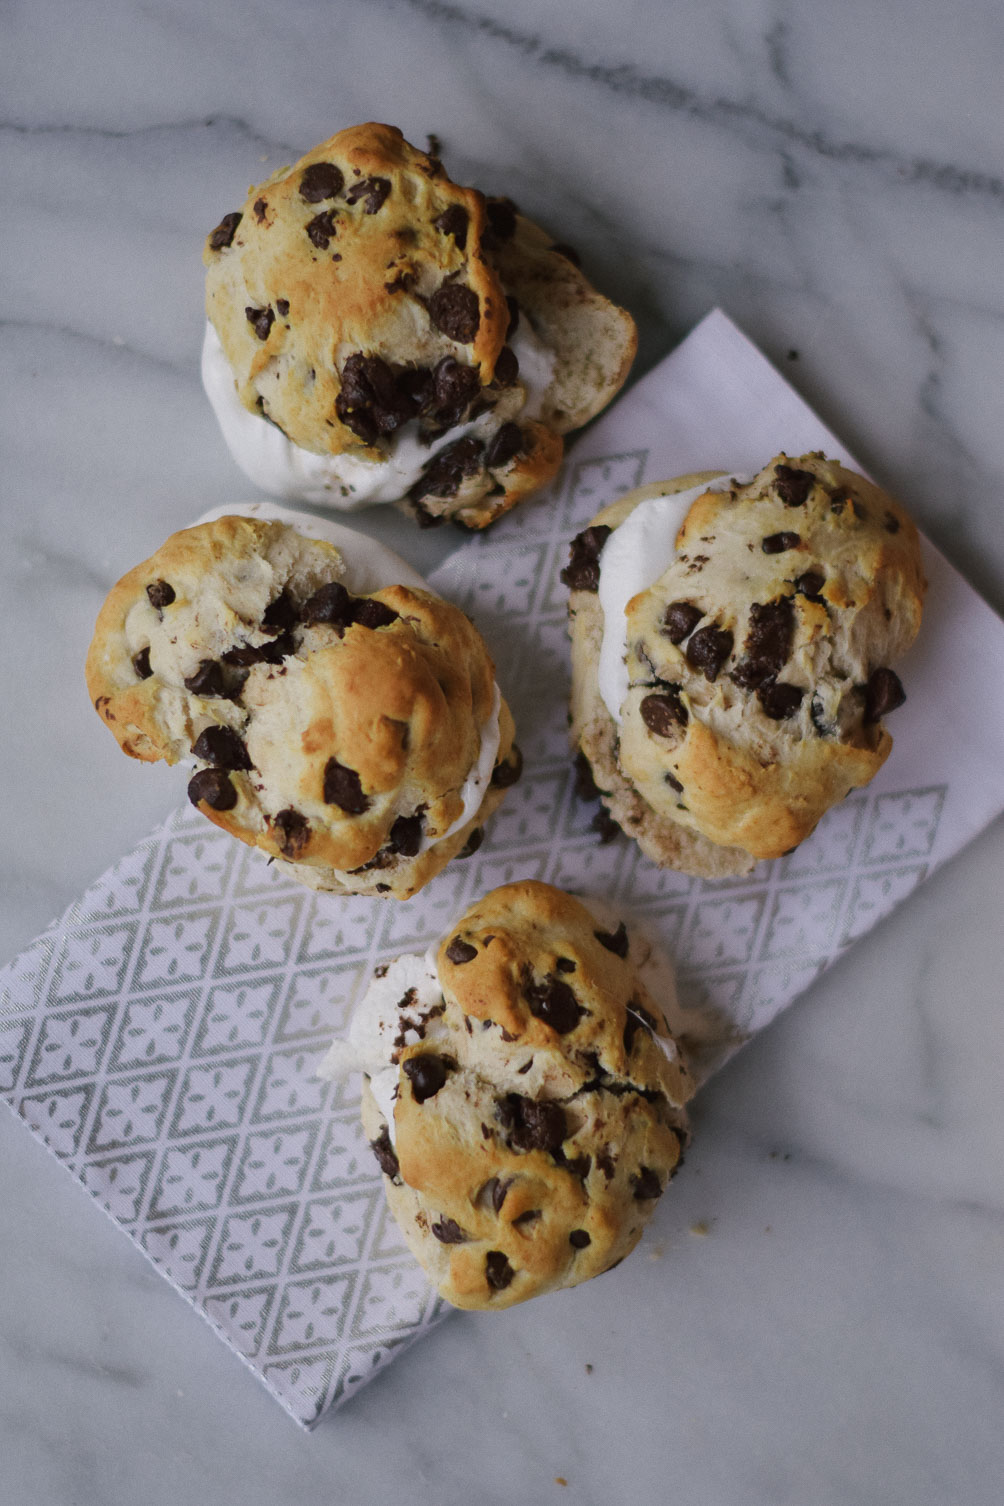 chocolate chip biscuit smores easy fall recipe for breakfast or dessert on one brass fox